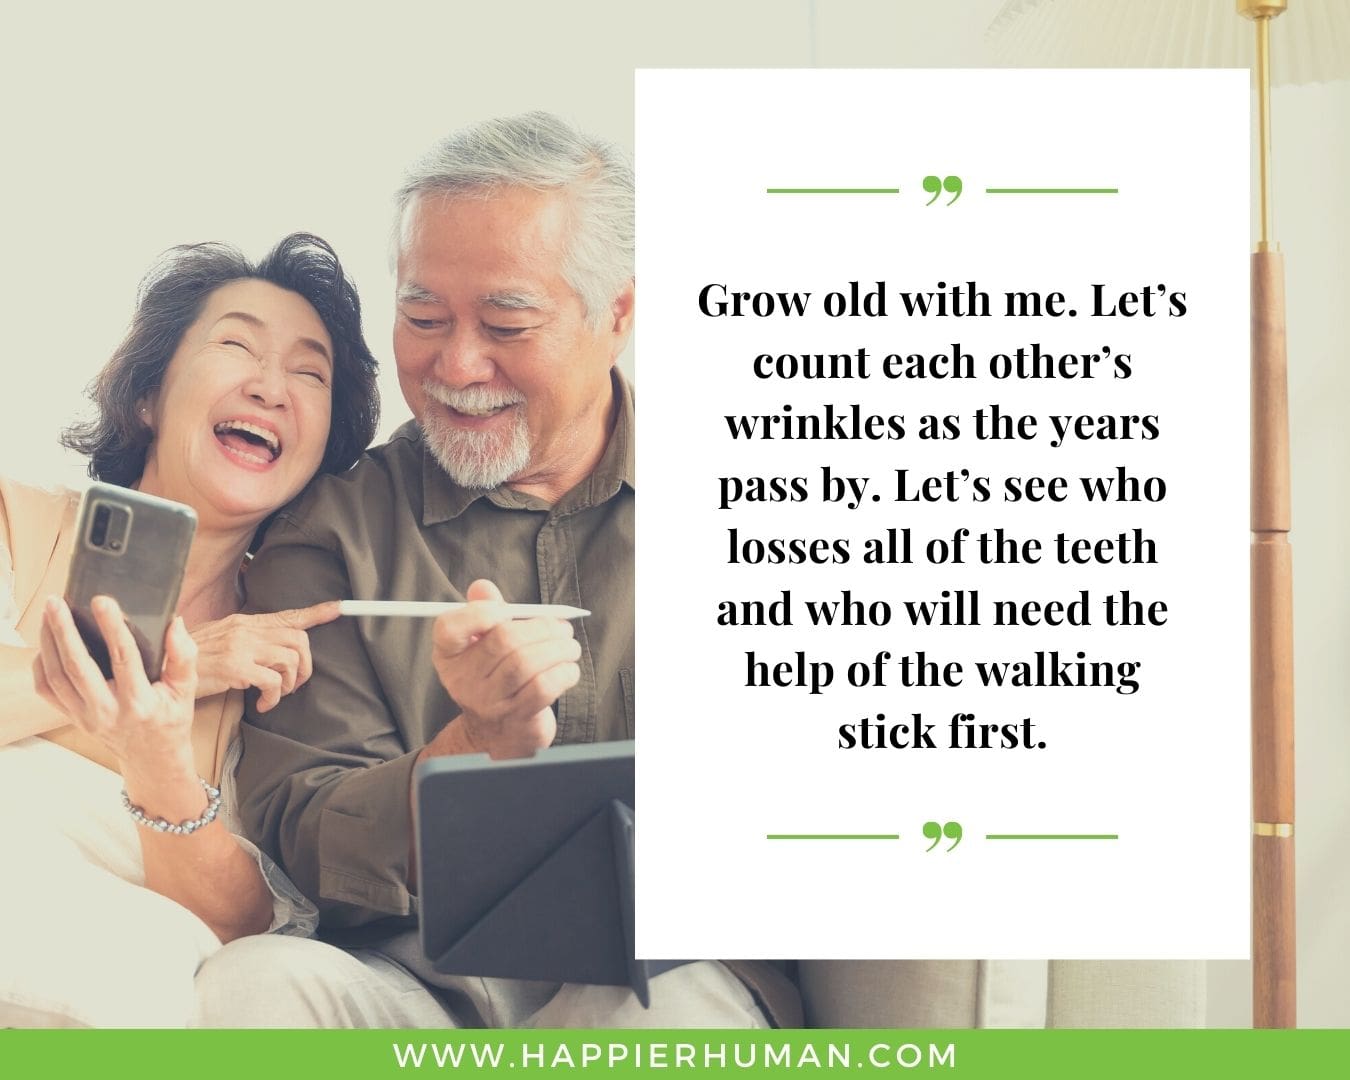 Funny Love Quotes for Her - “Grow old with me. Let’s count each other’s wrinkles as the years pass by. Let’s see who losses all of the teeth and who will need the help of the walking stick first.”